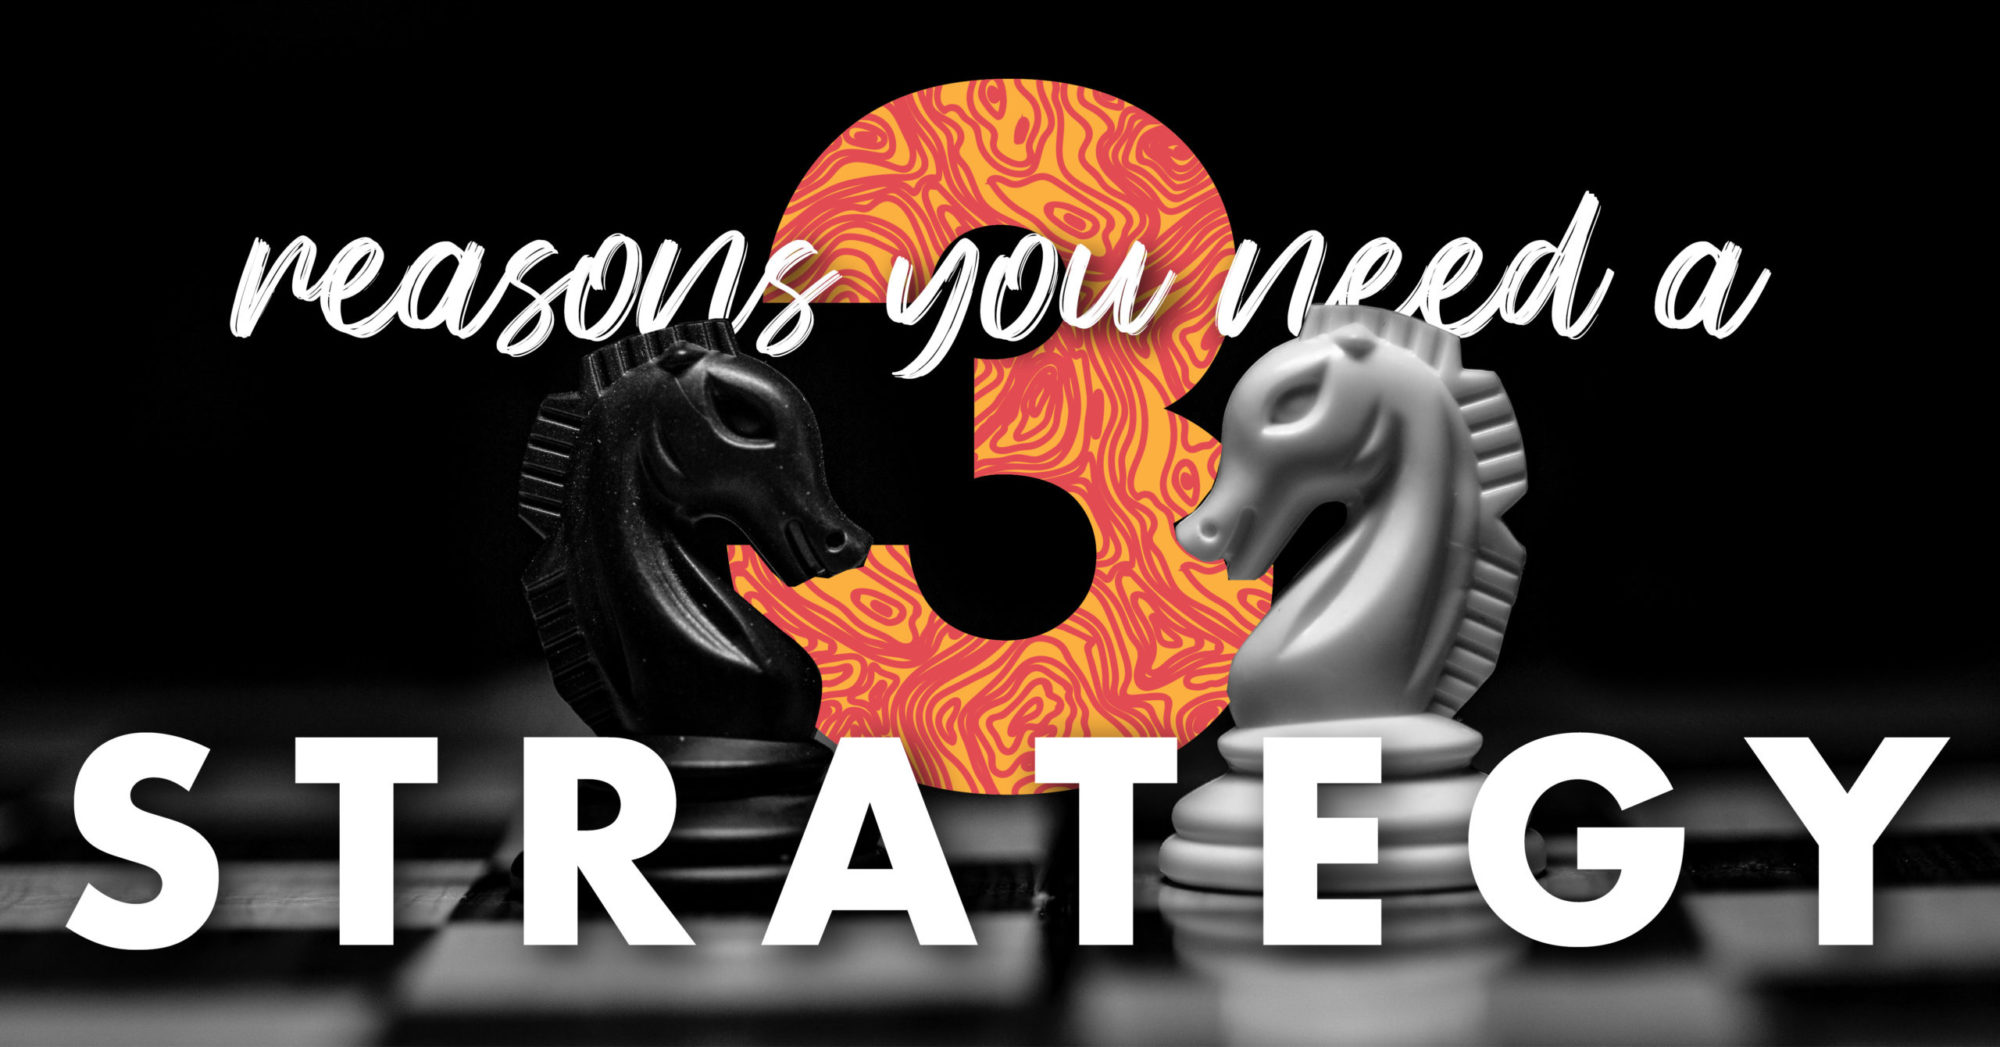 3 Reasons You Need a Strategy